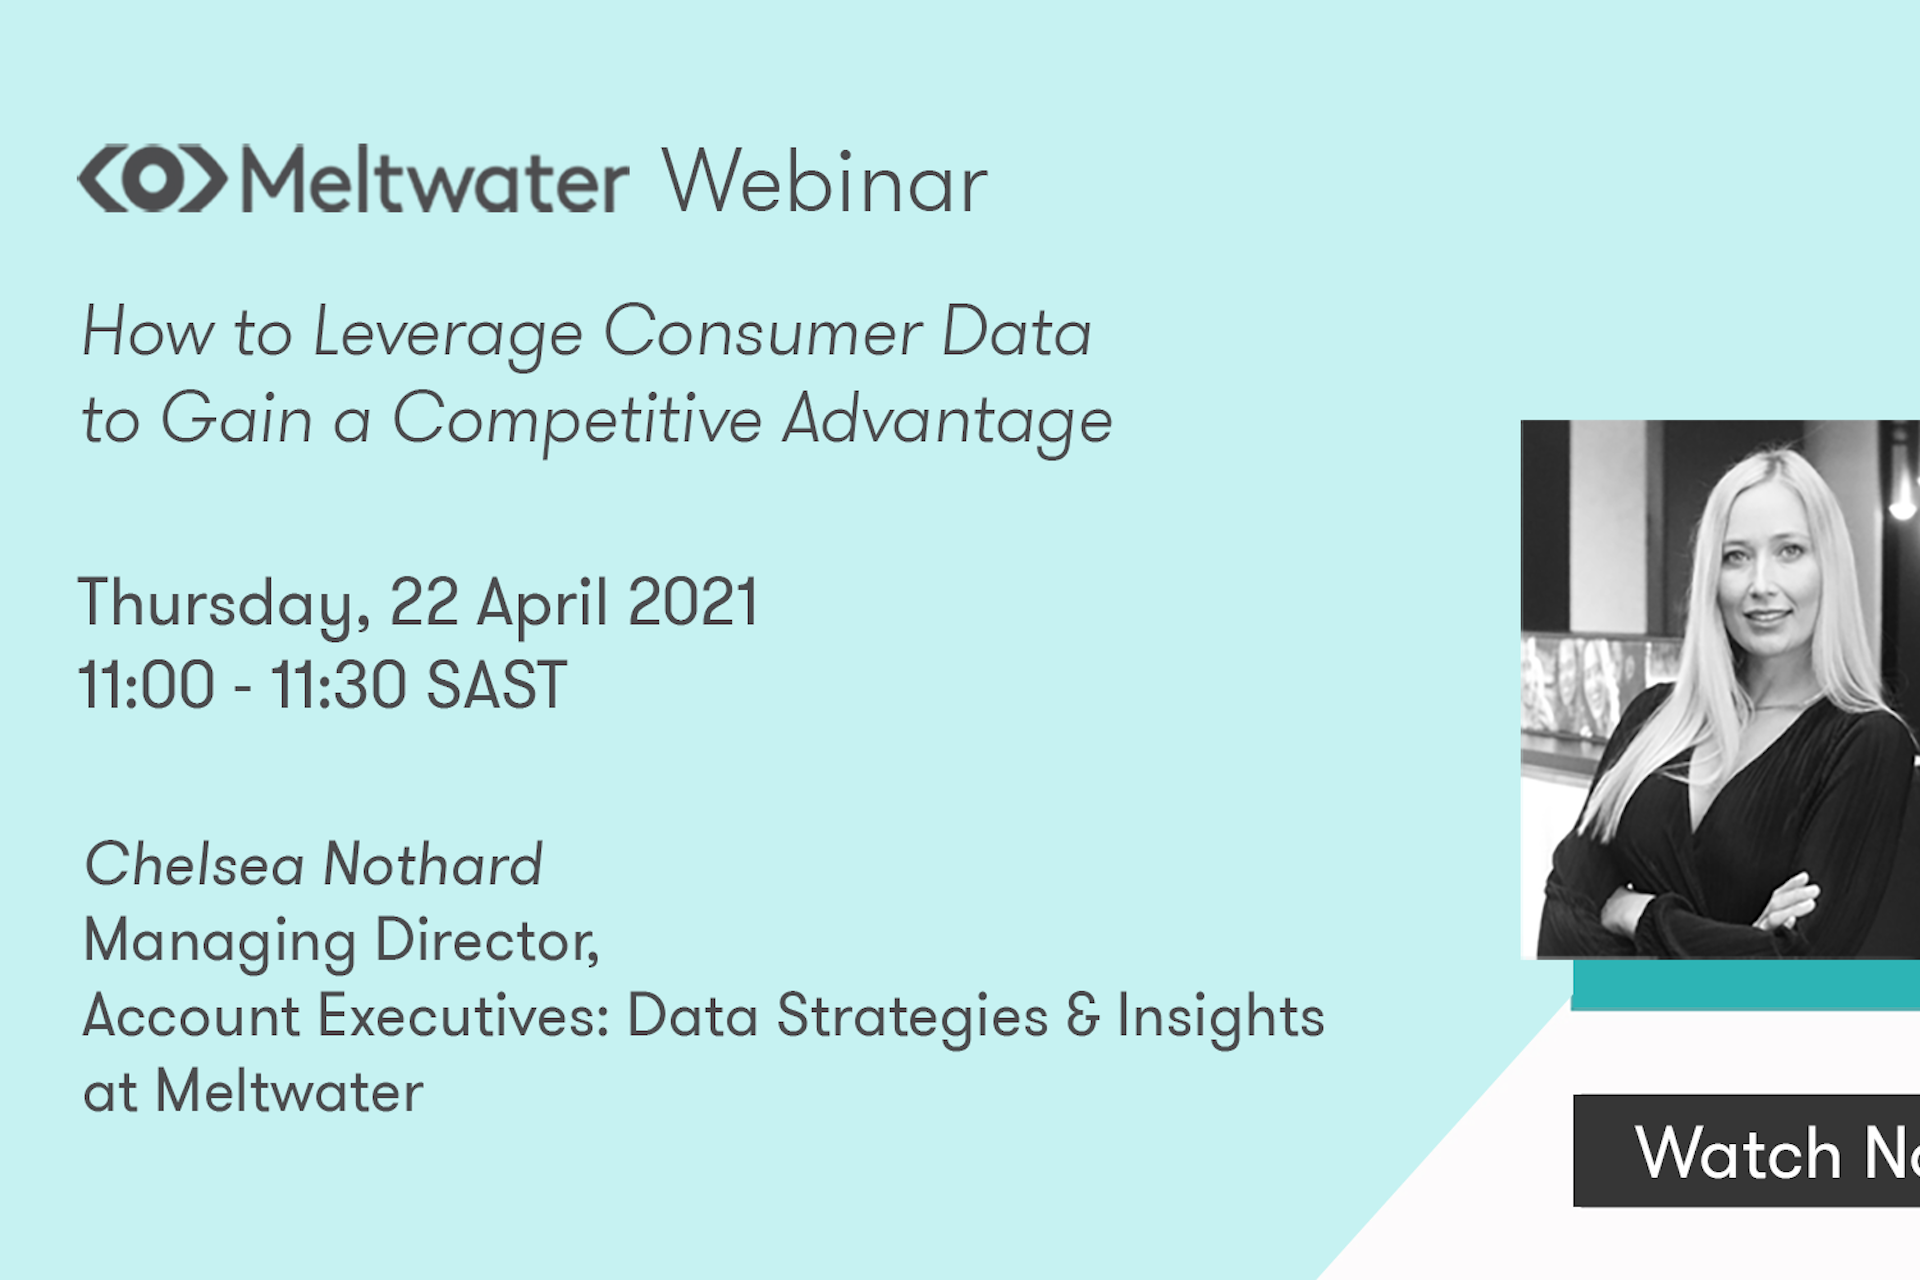 meltwater webinar on how to leverage consumer data to gain a competitive advantage